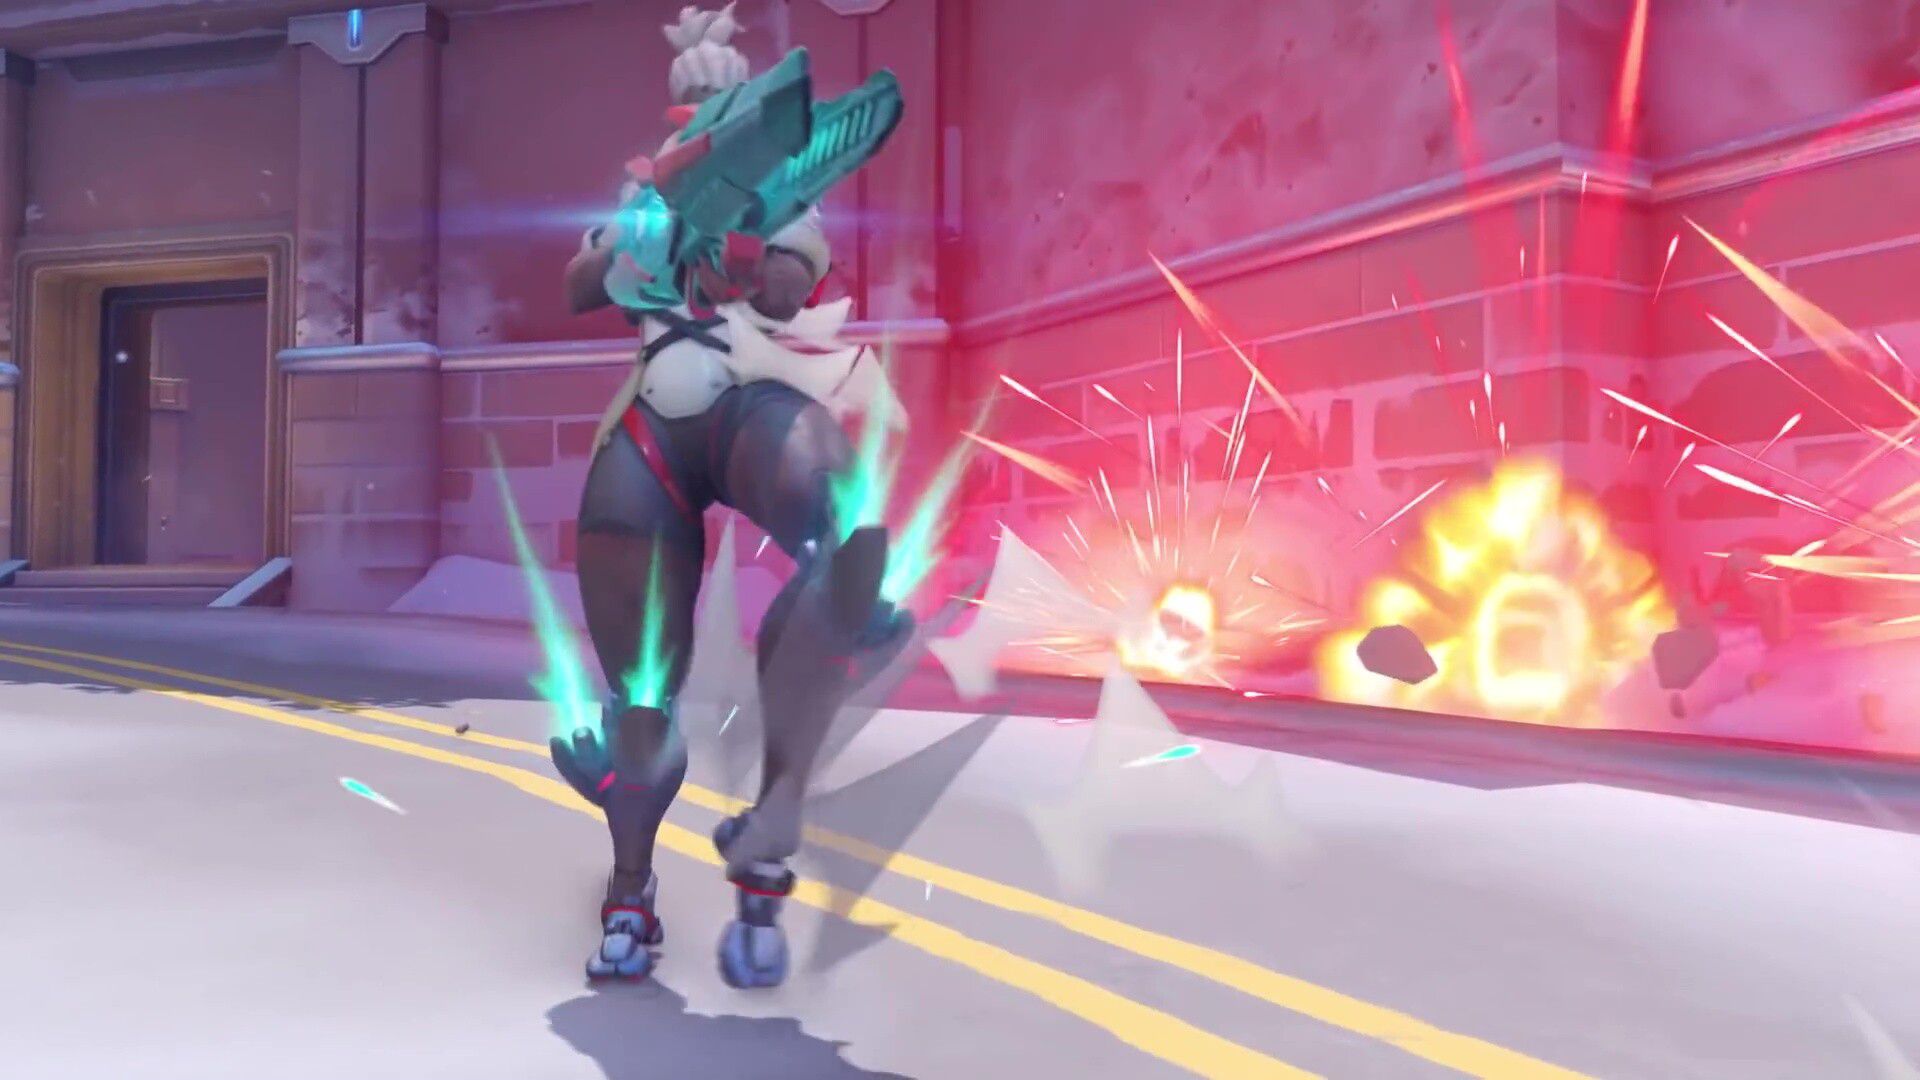 "Sojoan", a new character with a powerful rocket-equipped thigh with a whip whip of the Overwatch 2 machine 16